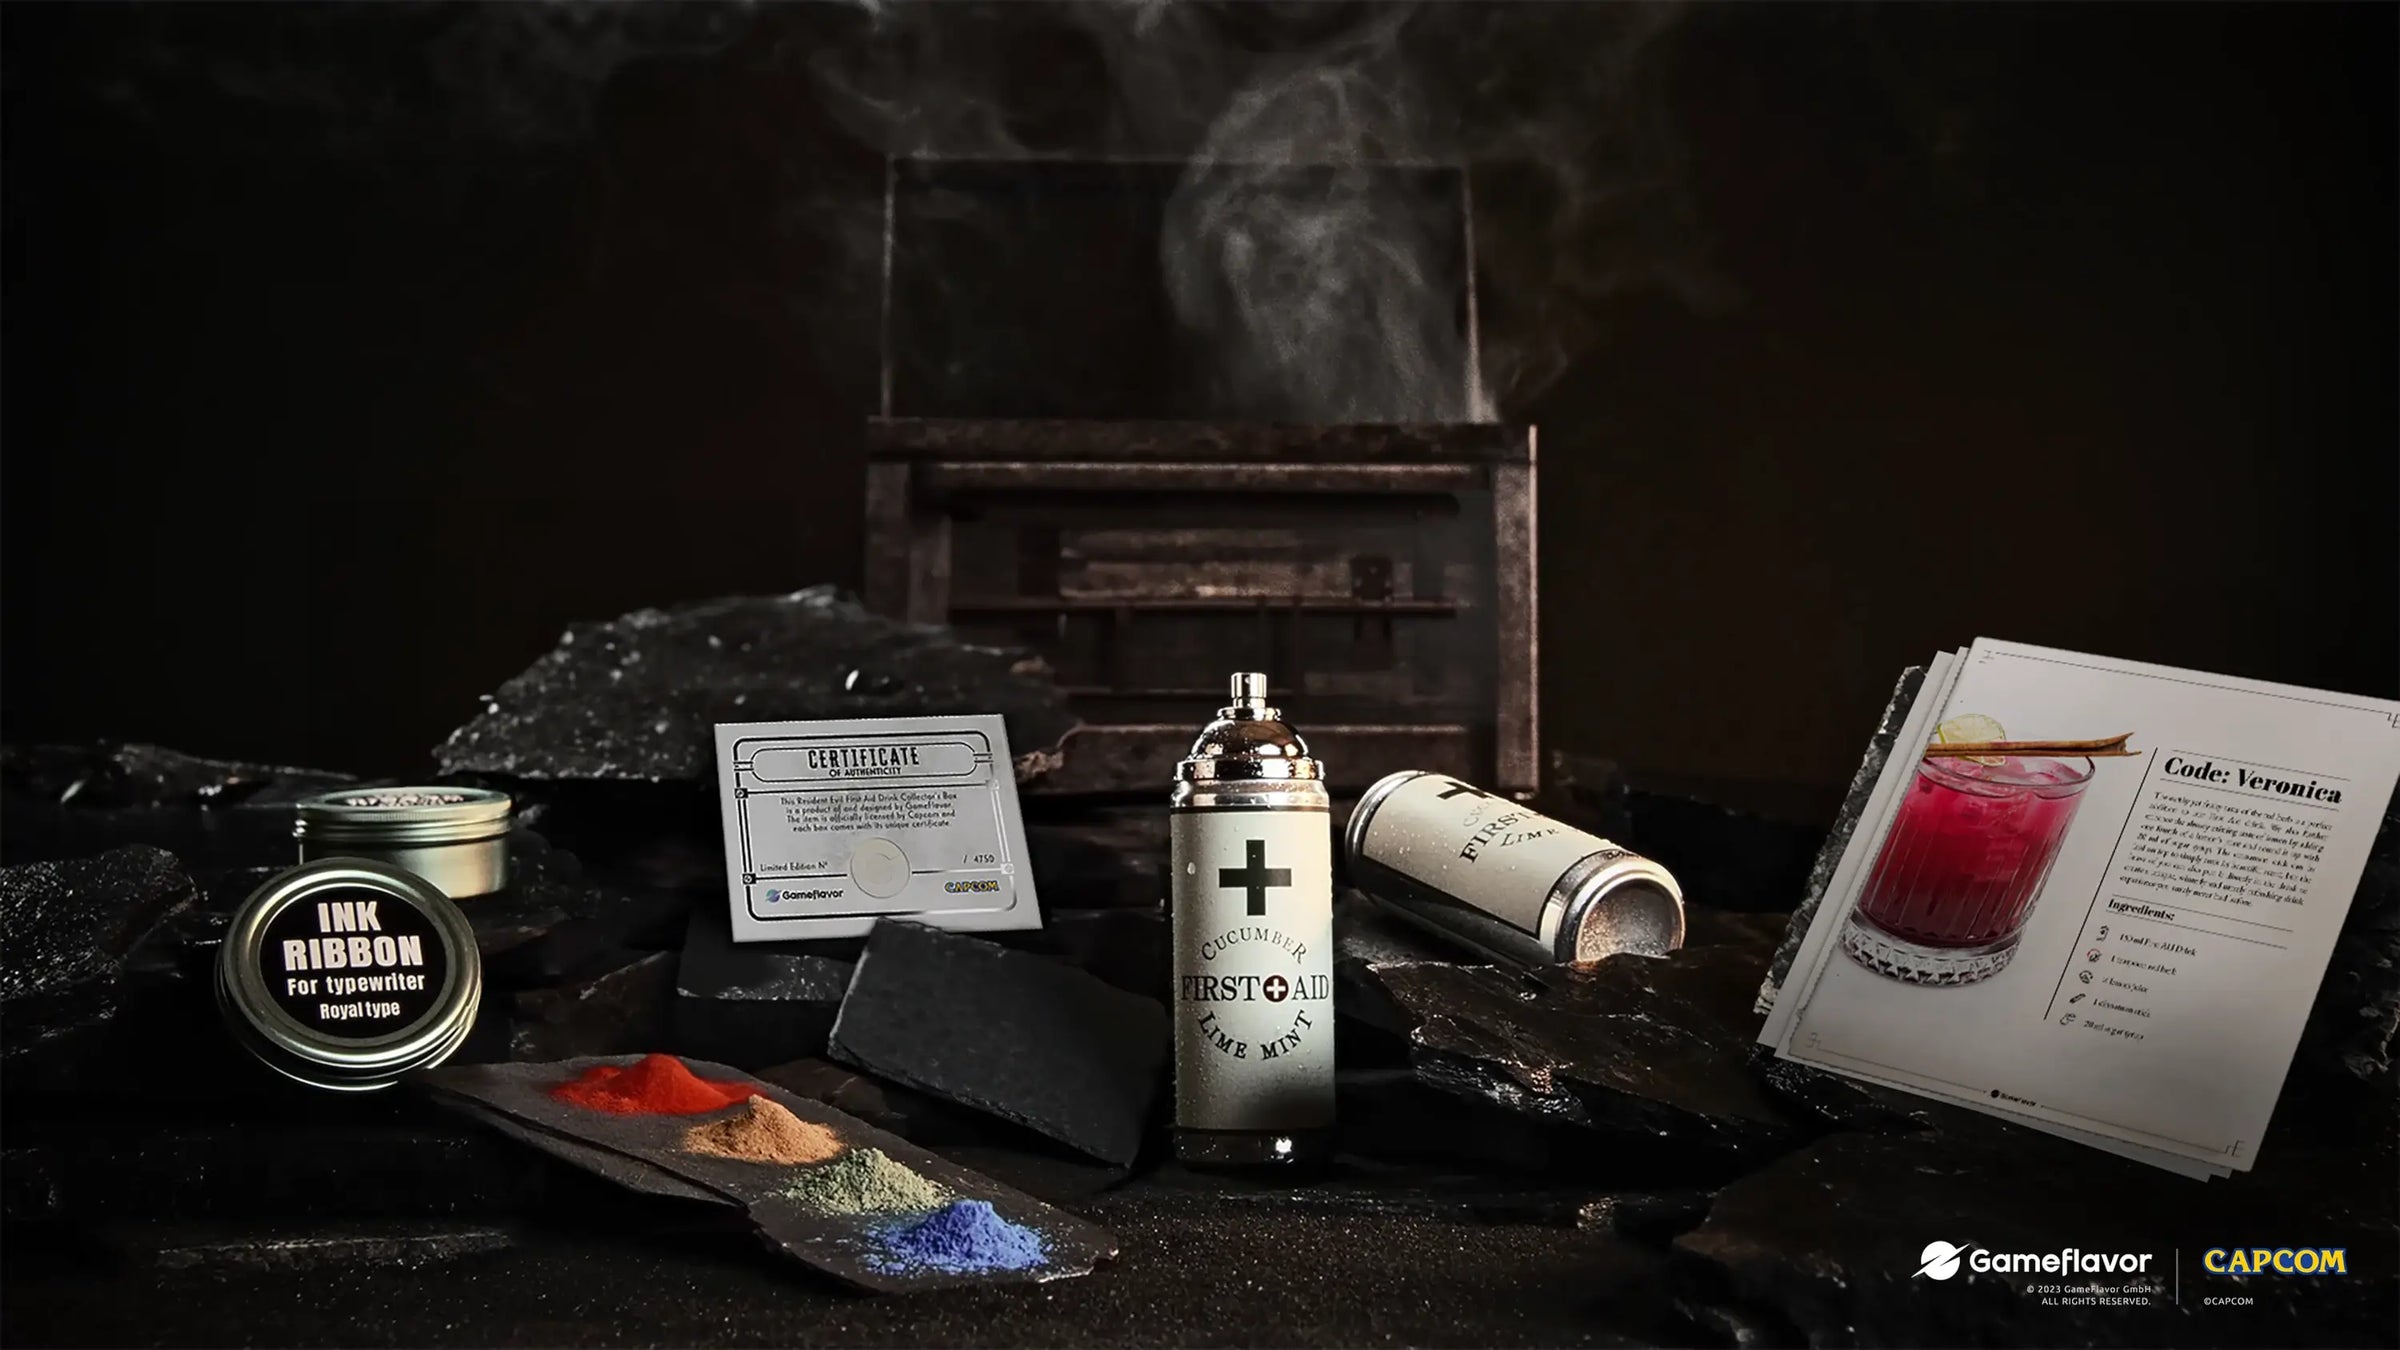 Resident Evil First Aid Drink Collector’s Box Is Now Shipping